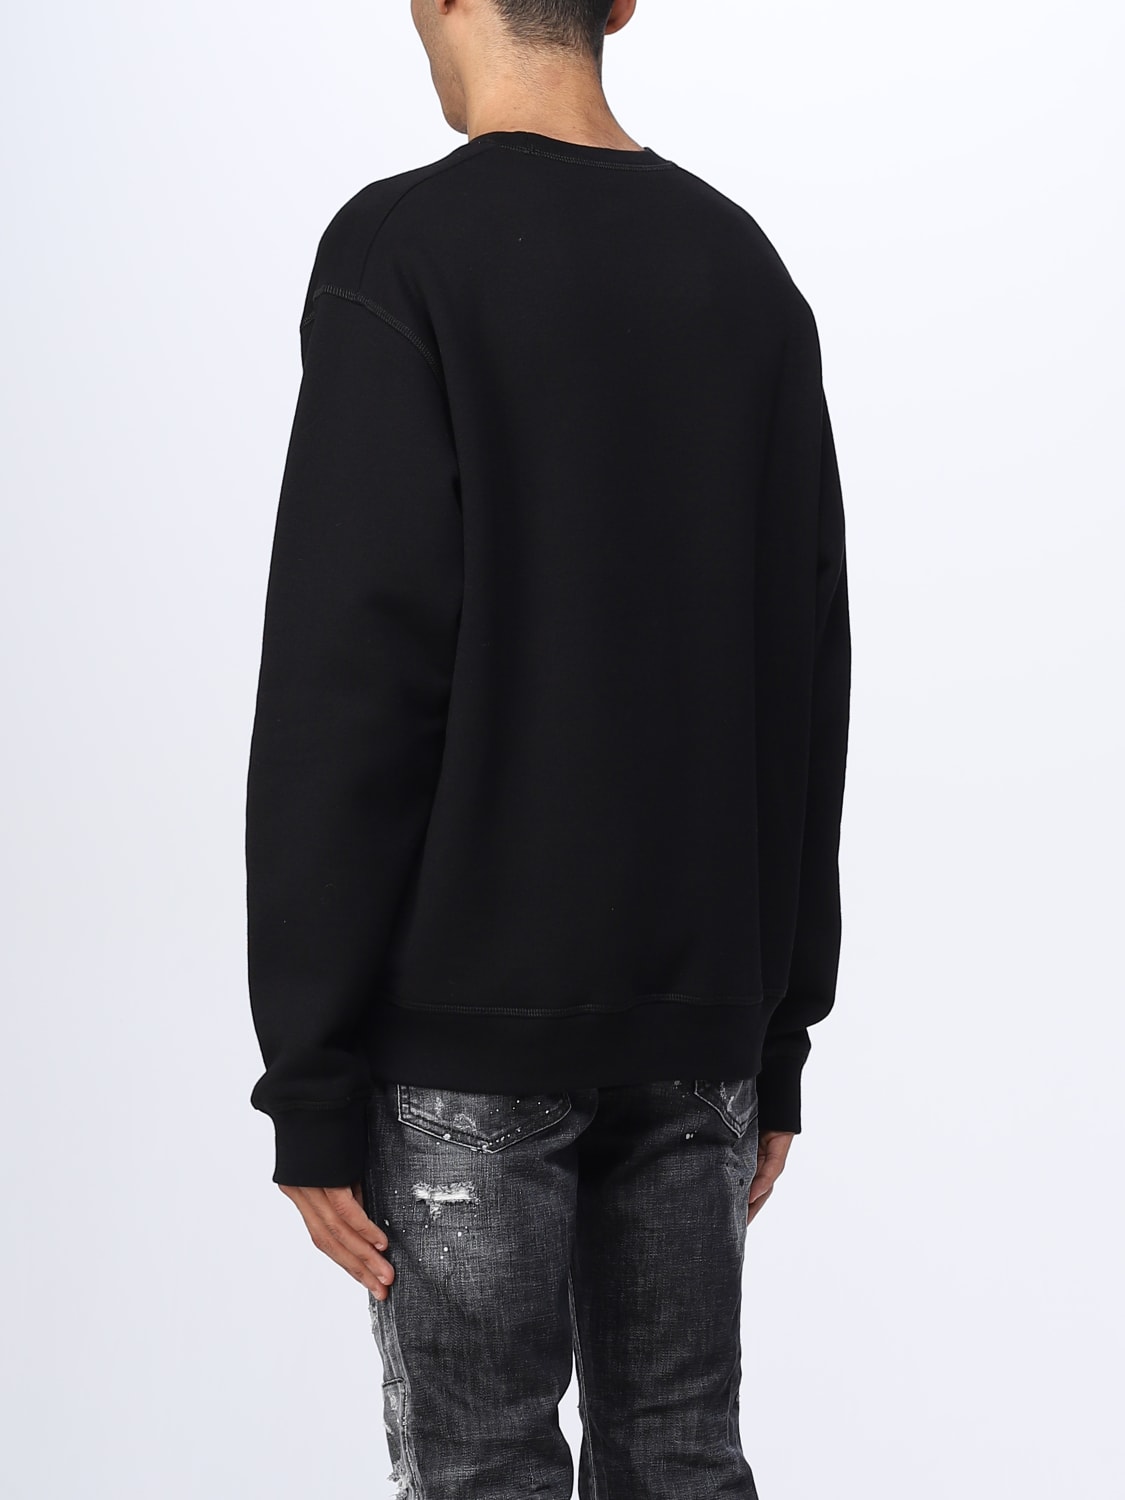 DSQUARED2: sweater for man - Black | Dsquared2 sweater S71GU0601S25516 ...